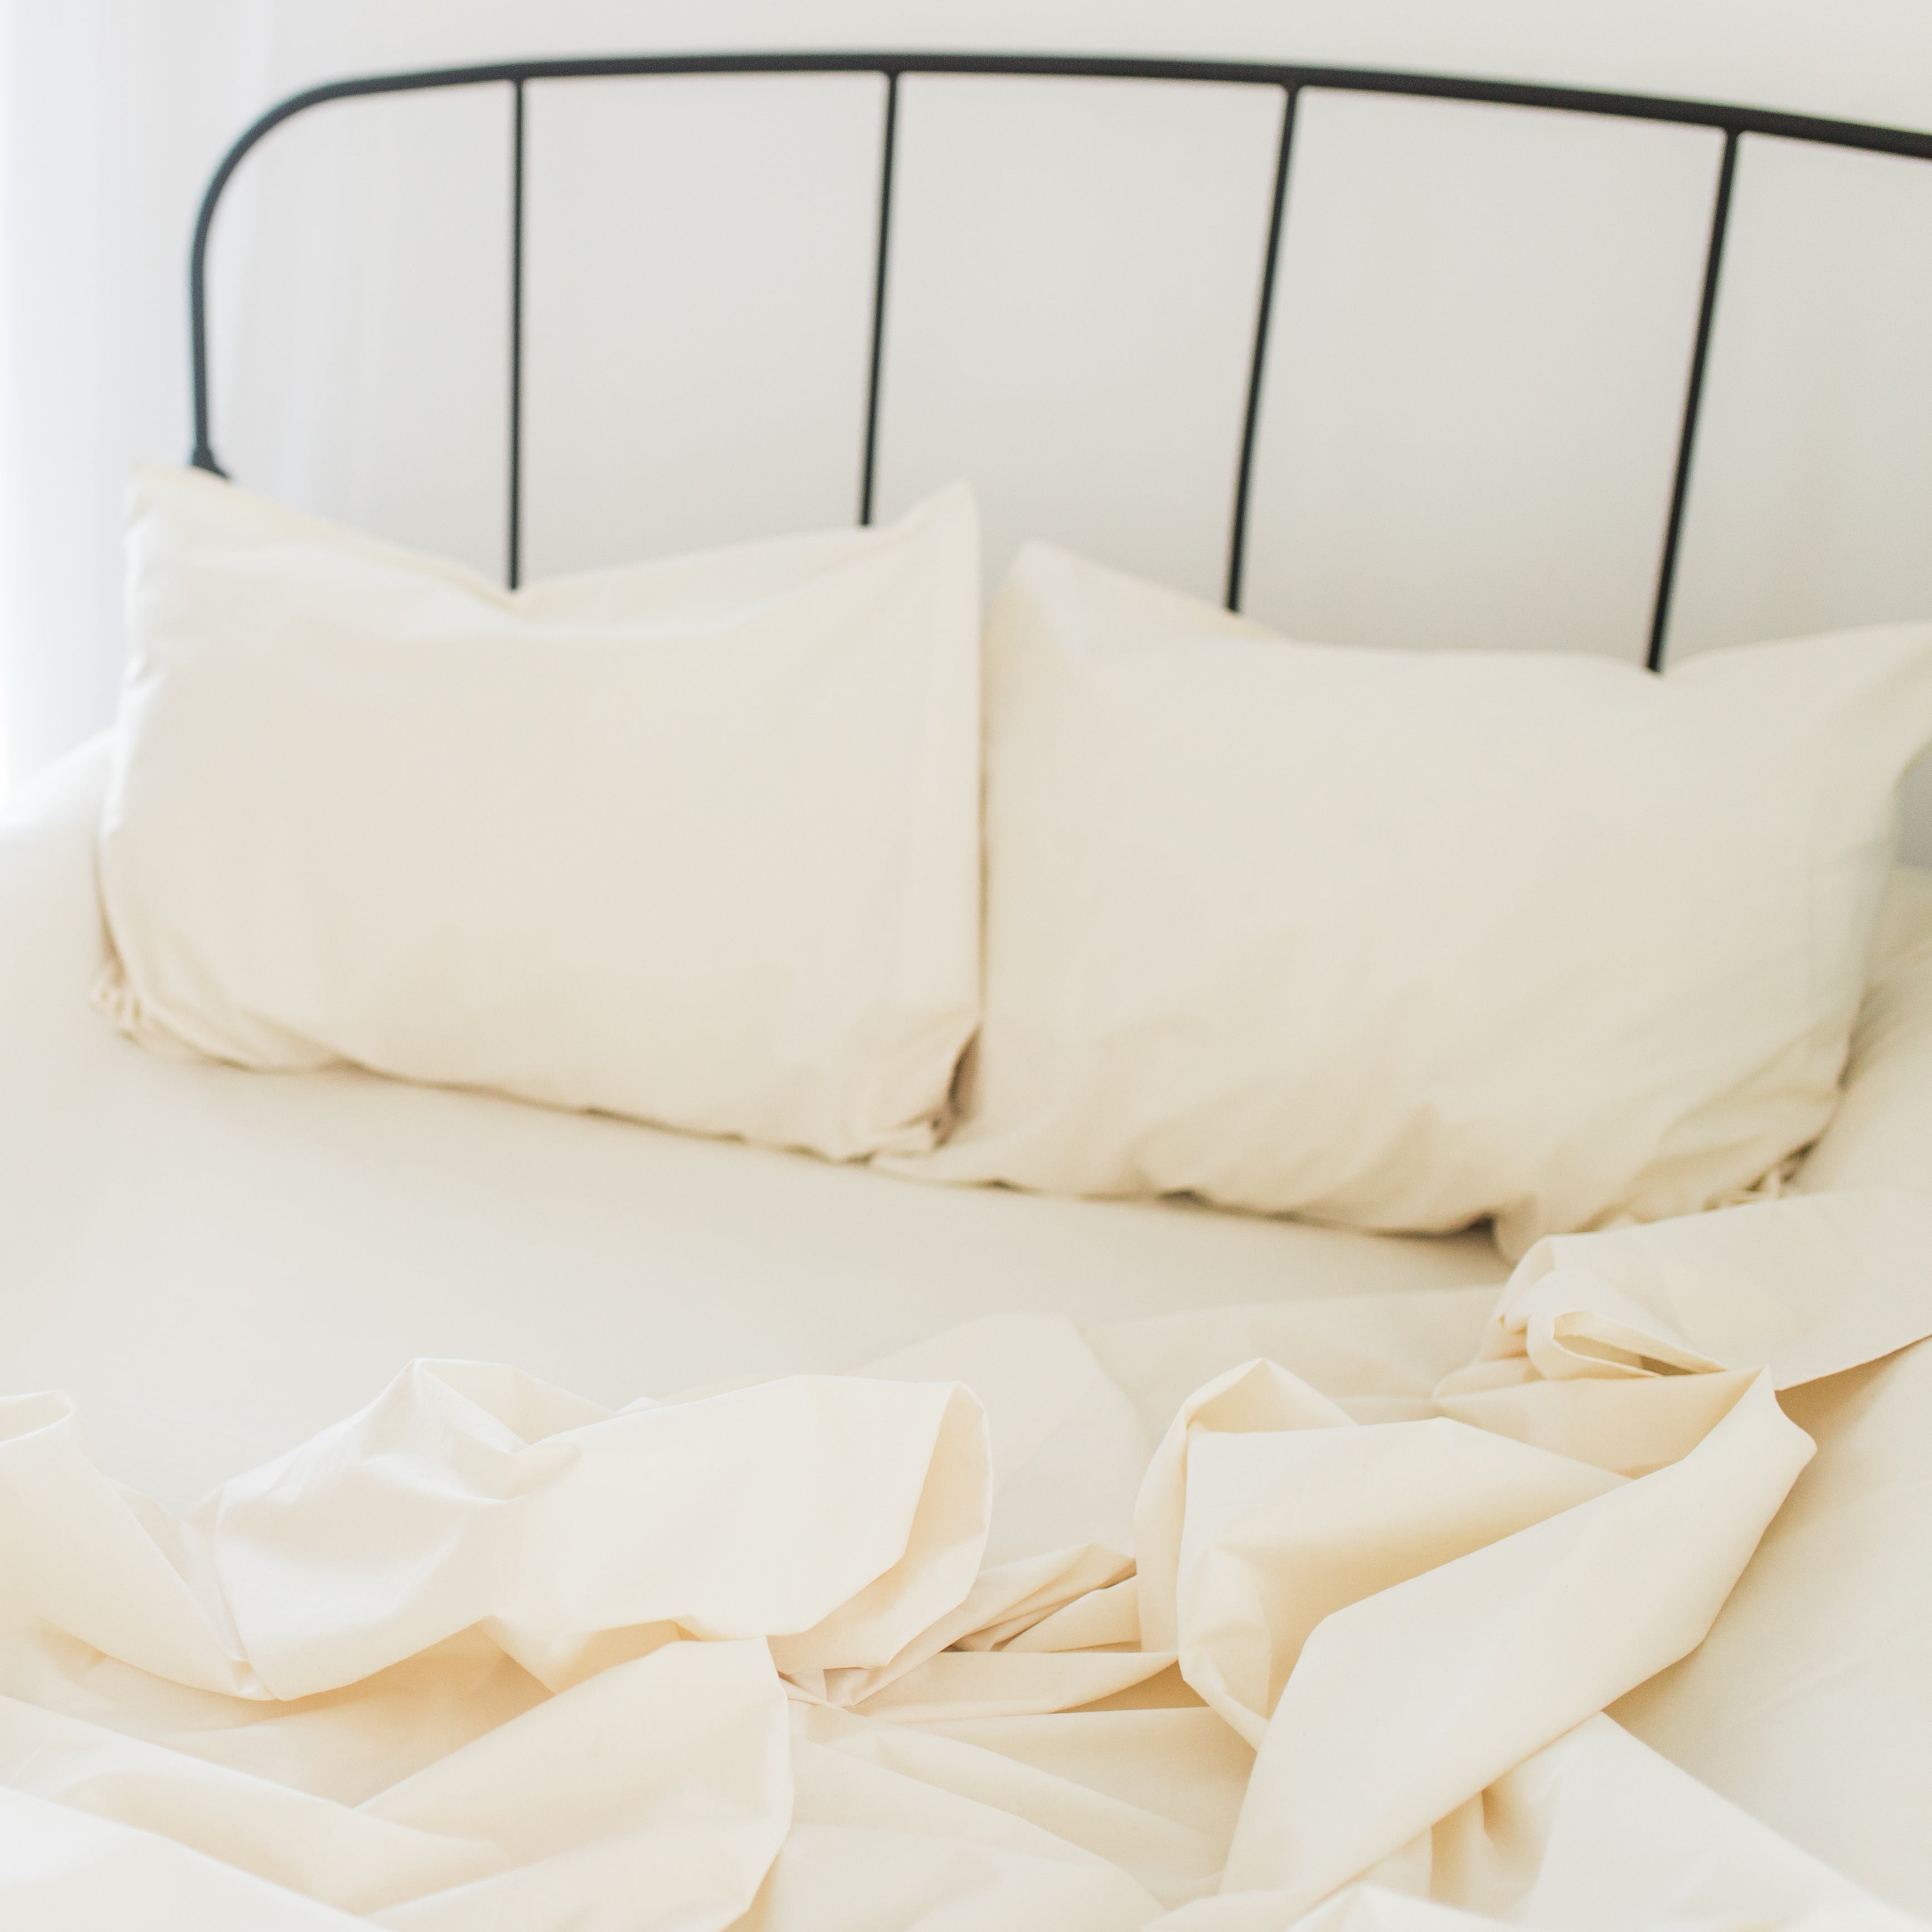 An Oolie organic cotton sheet set in natural, unbleached cotton installed on a full size bed.